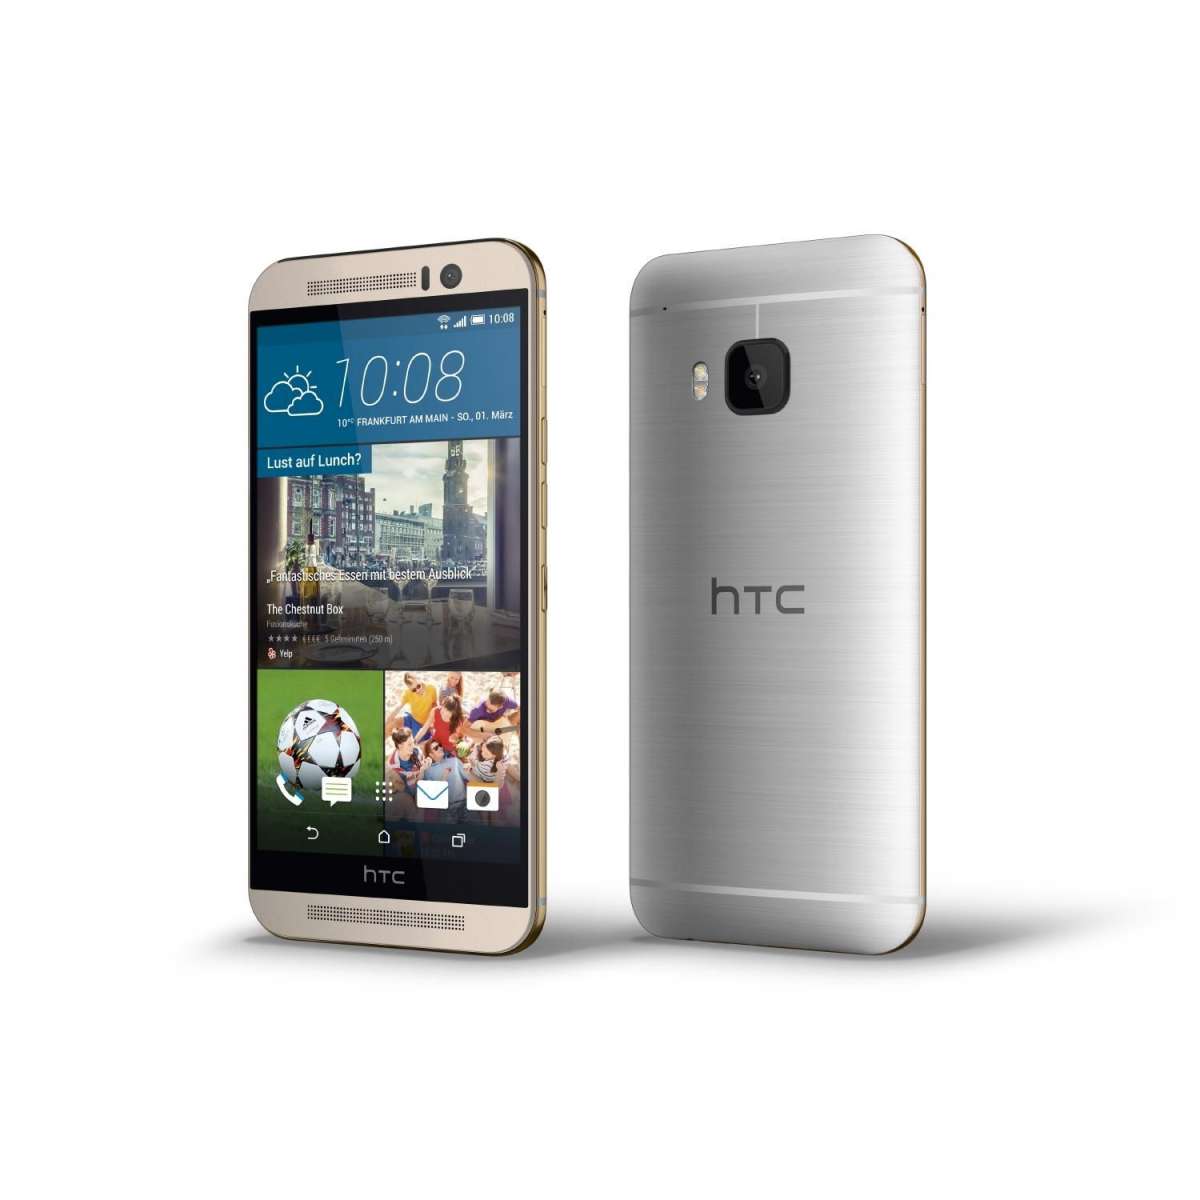 HTC One M9 press images